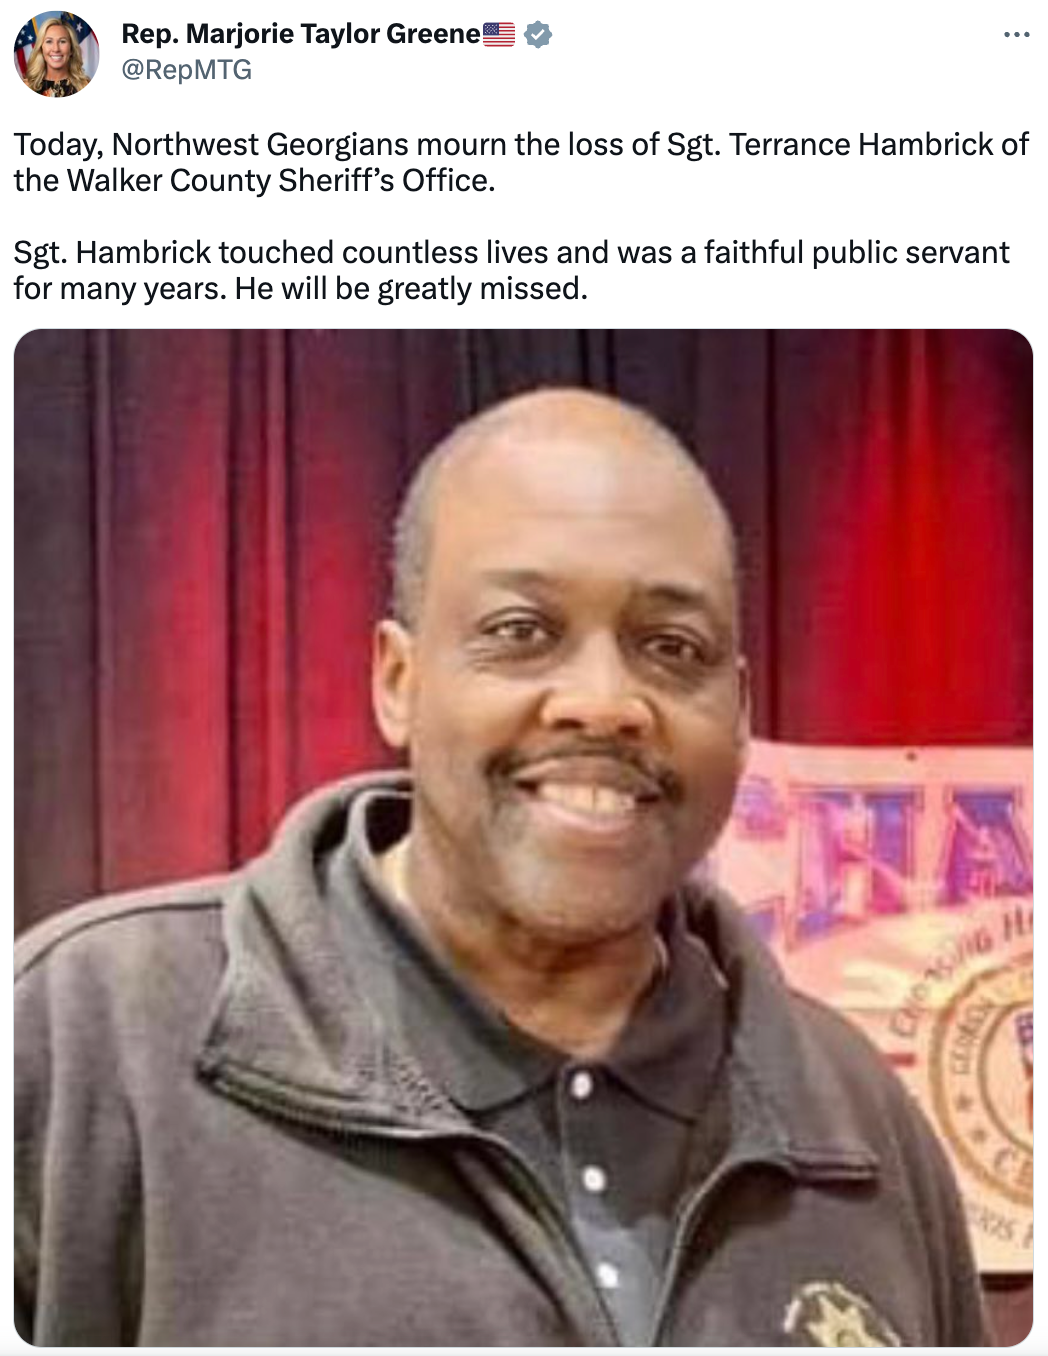 Northwest Georgians are mourning the loss of Sgt. Terrance Hambrick of the Walker County Sheriff's Office